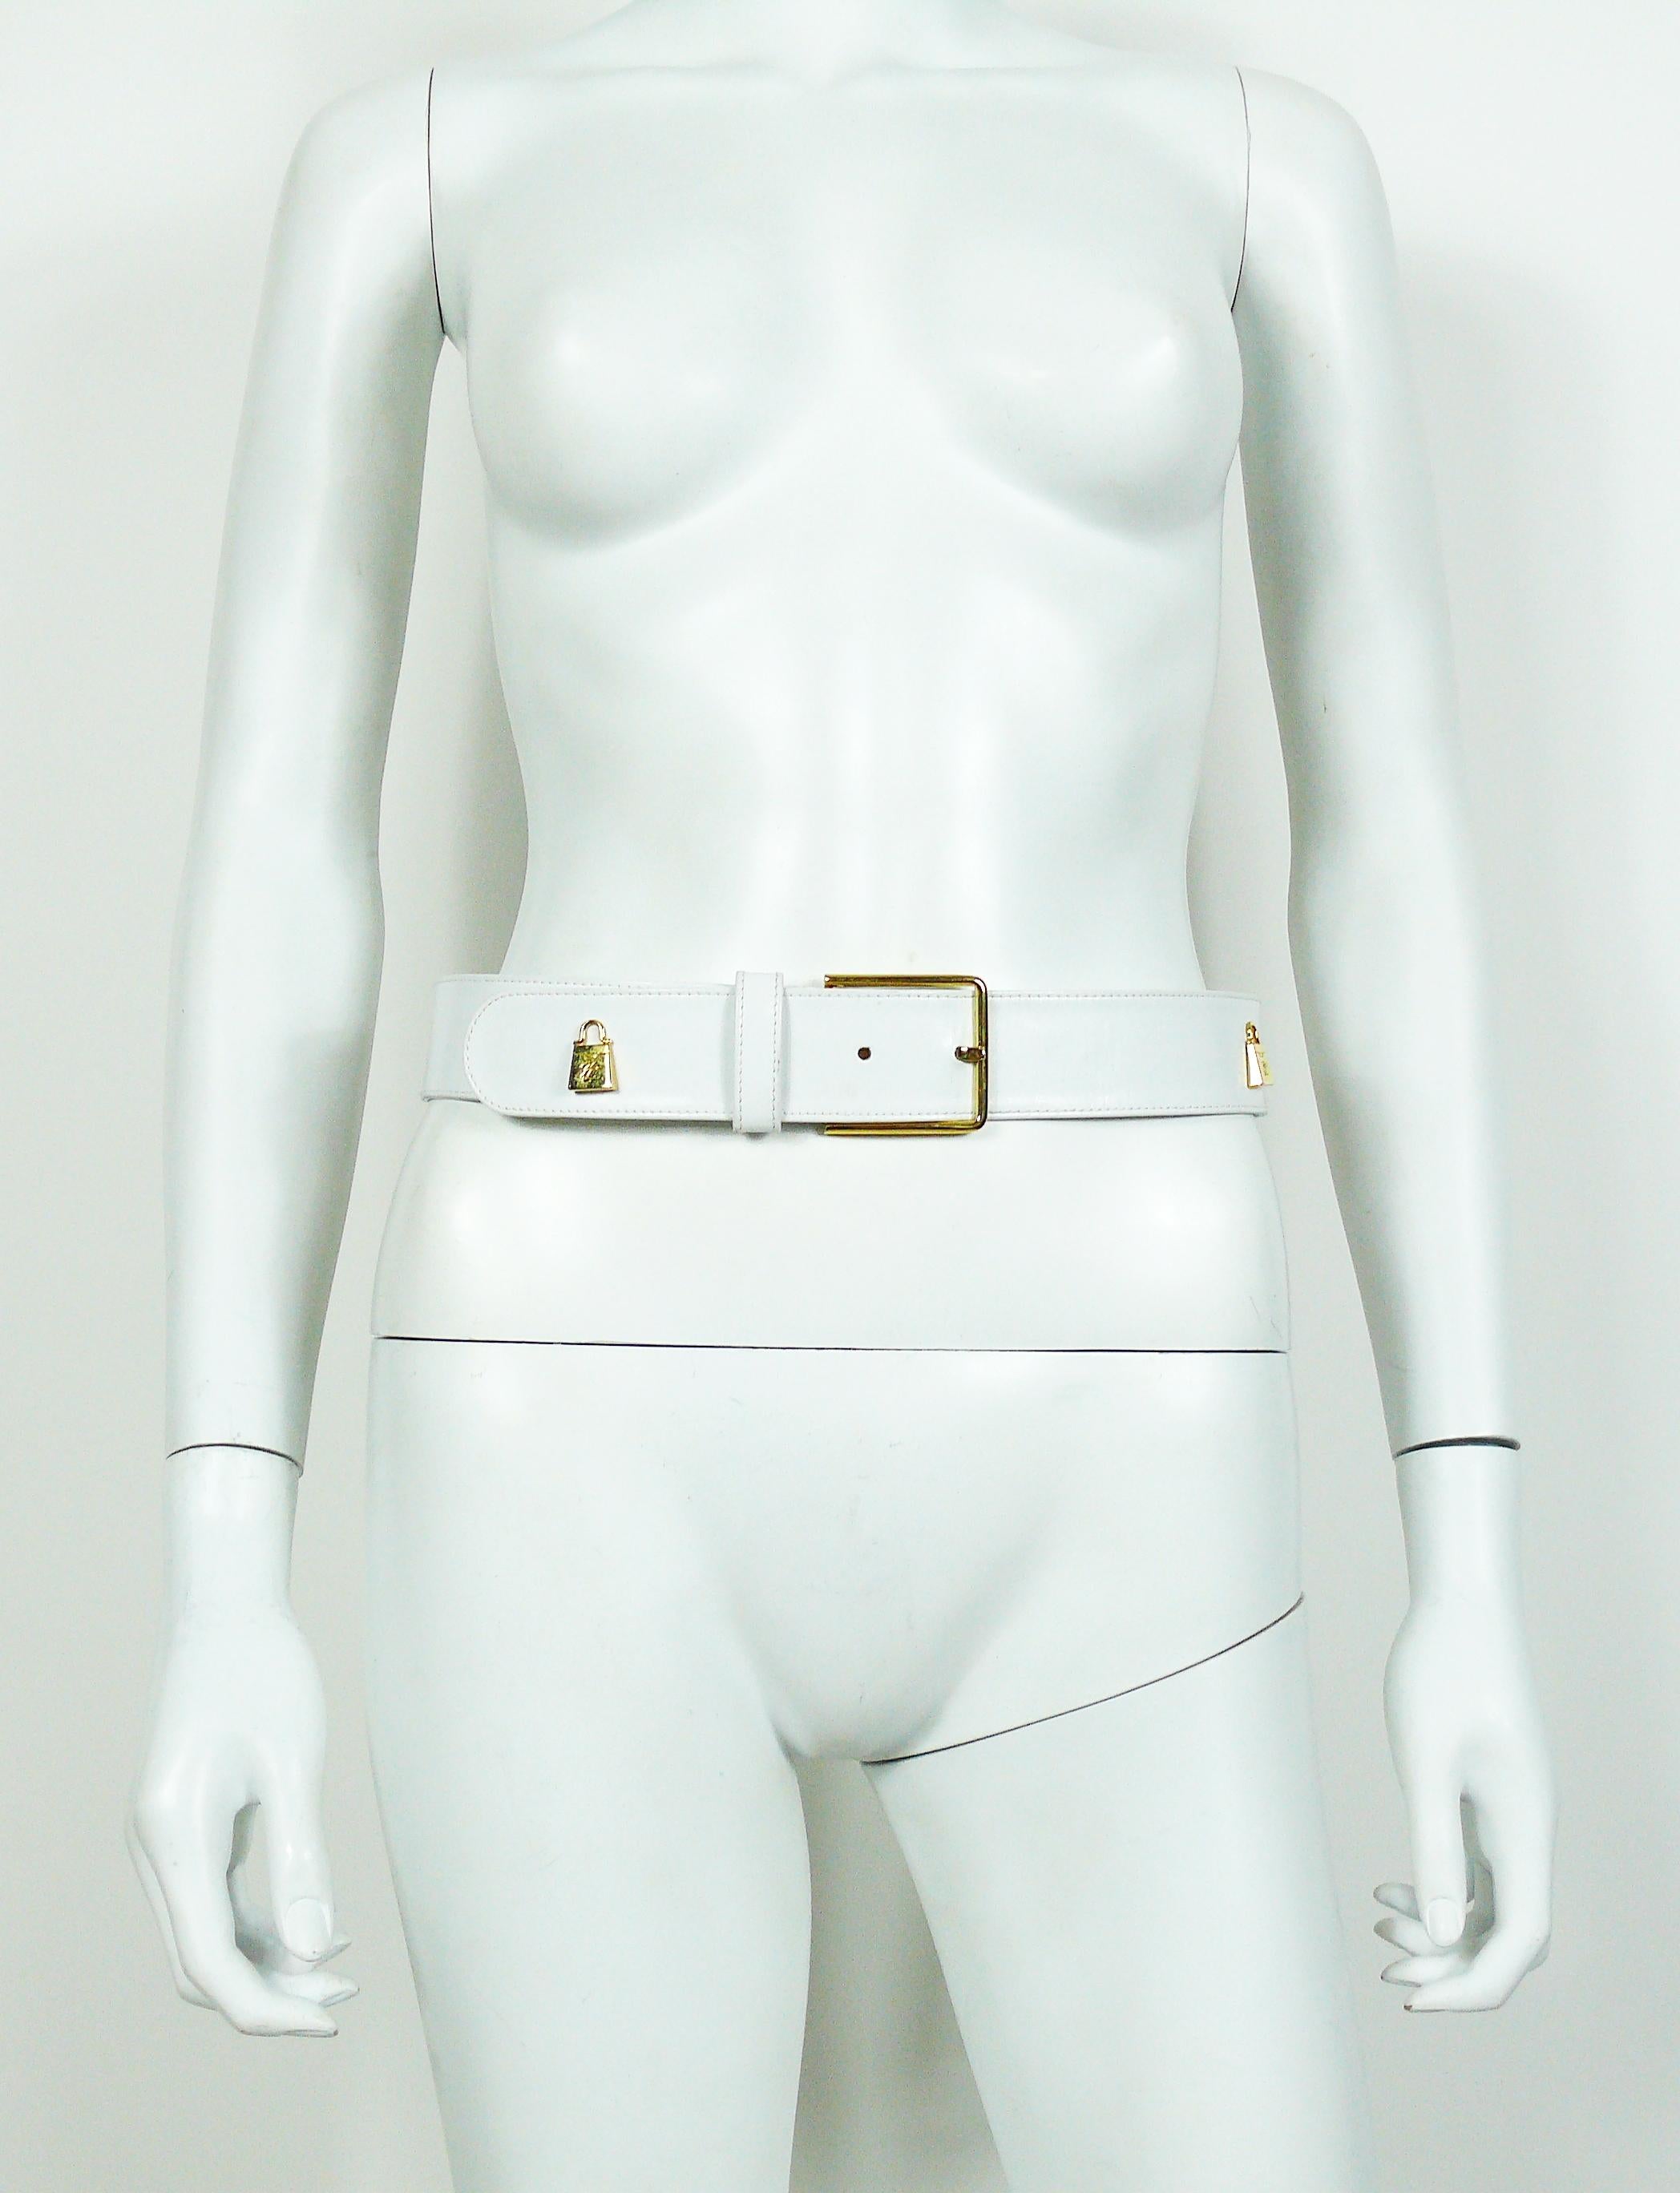 KARL LAGERFELD vintage white leather belt belt featuring gold toned handbags embossed KL.

Marked KARL LAGERFELD Paris.
Made in Italy.

Indicative measurements : adjustable length from approx. 76 cm (29.92 inches) to approx. 82 cm (32.28 inches) /